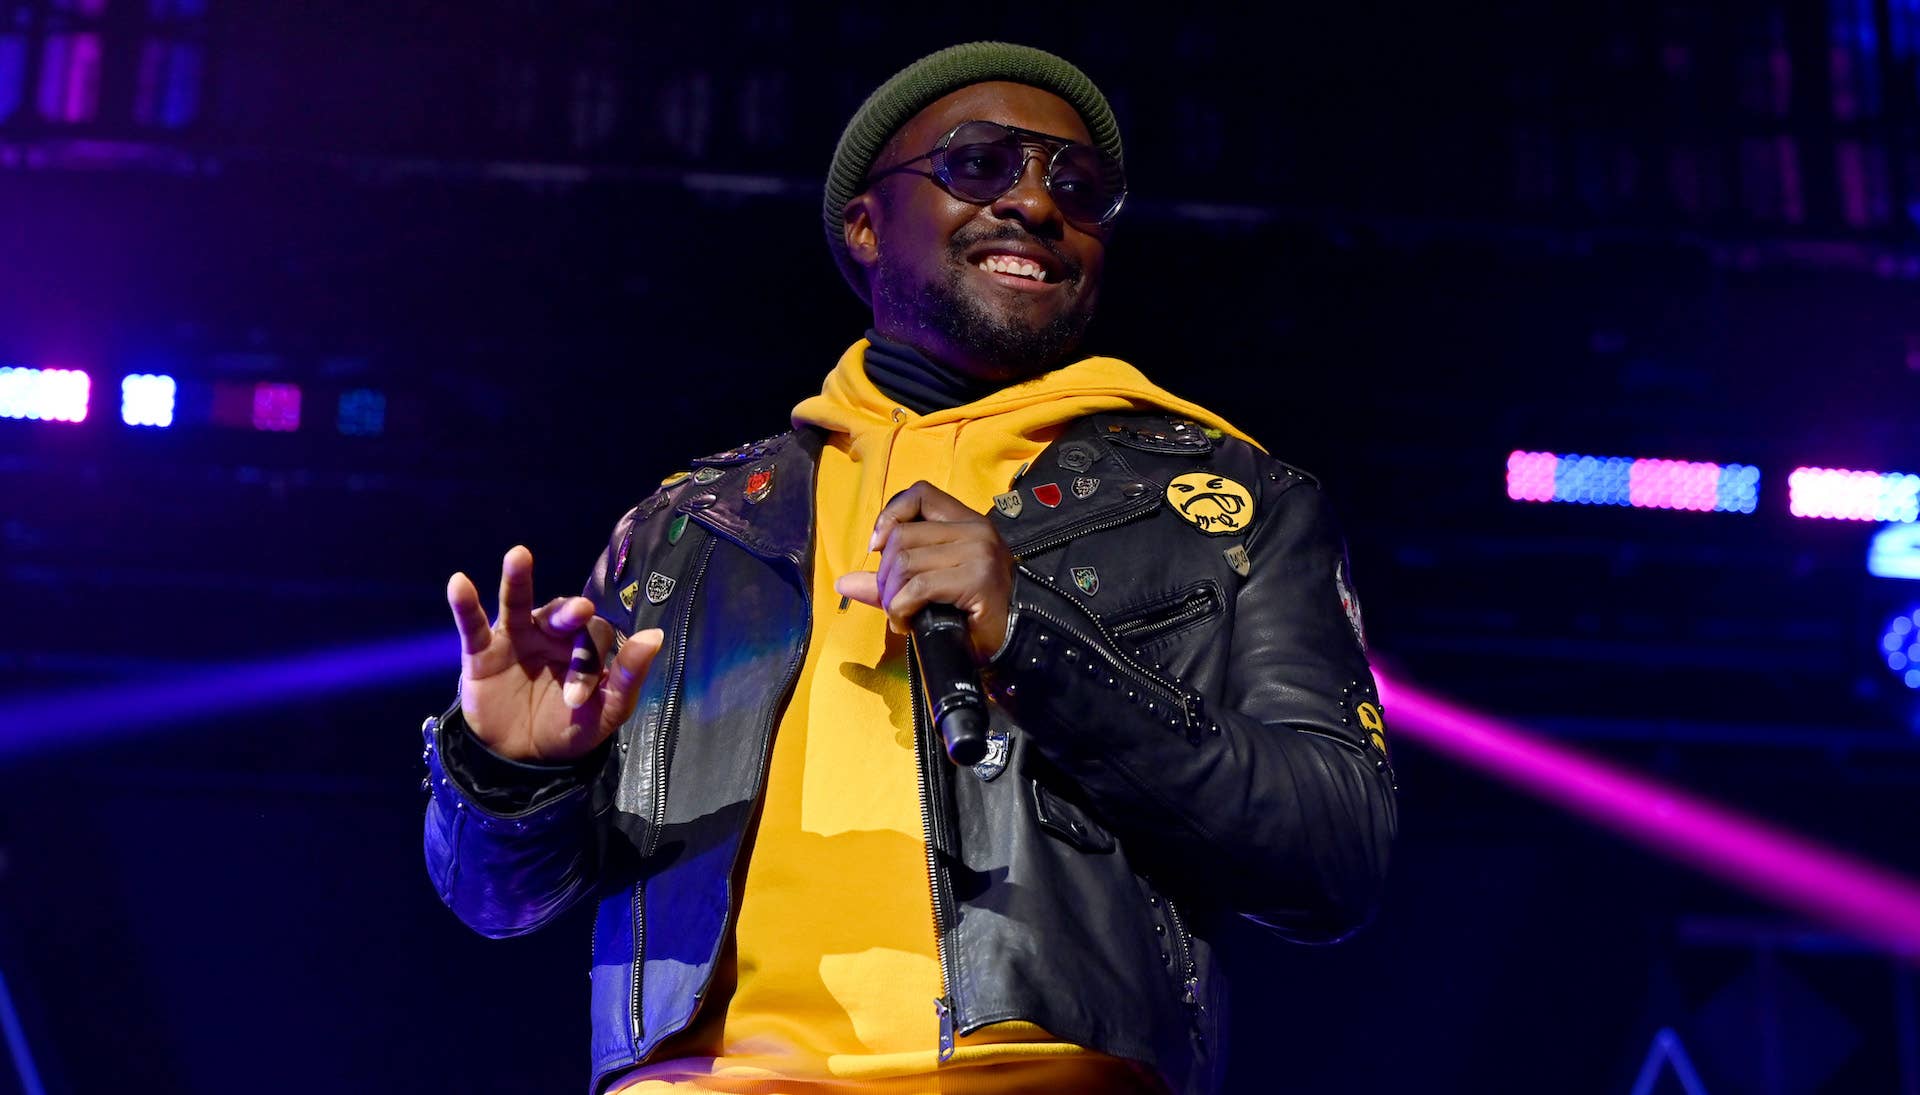 Will.i.am performs onstage during iHeartRadio Power 96.1’s Jingle Ball 2021